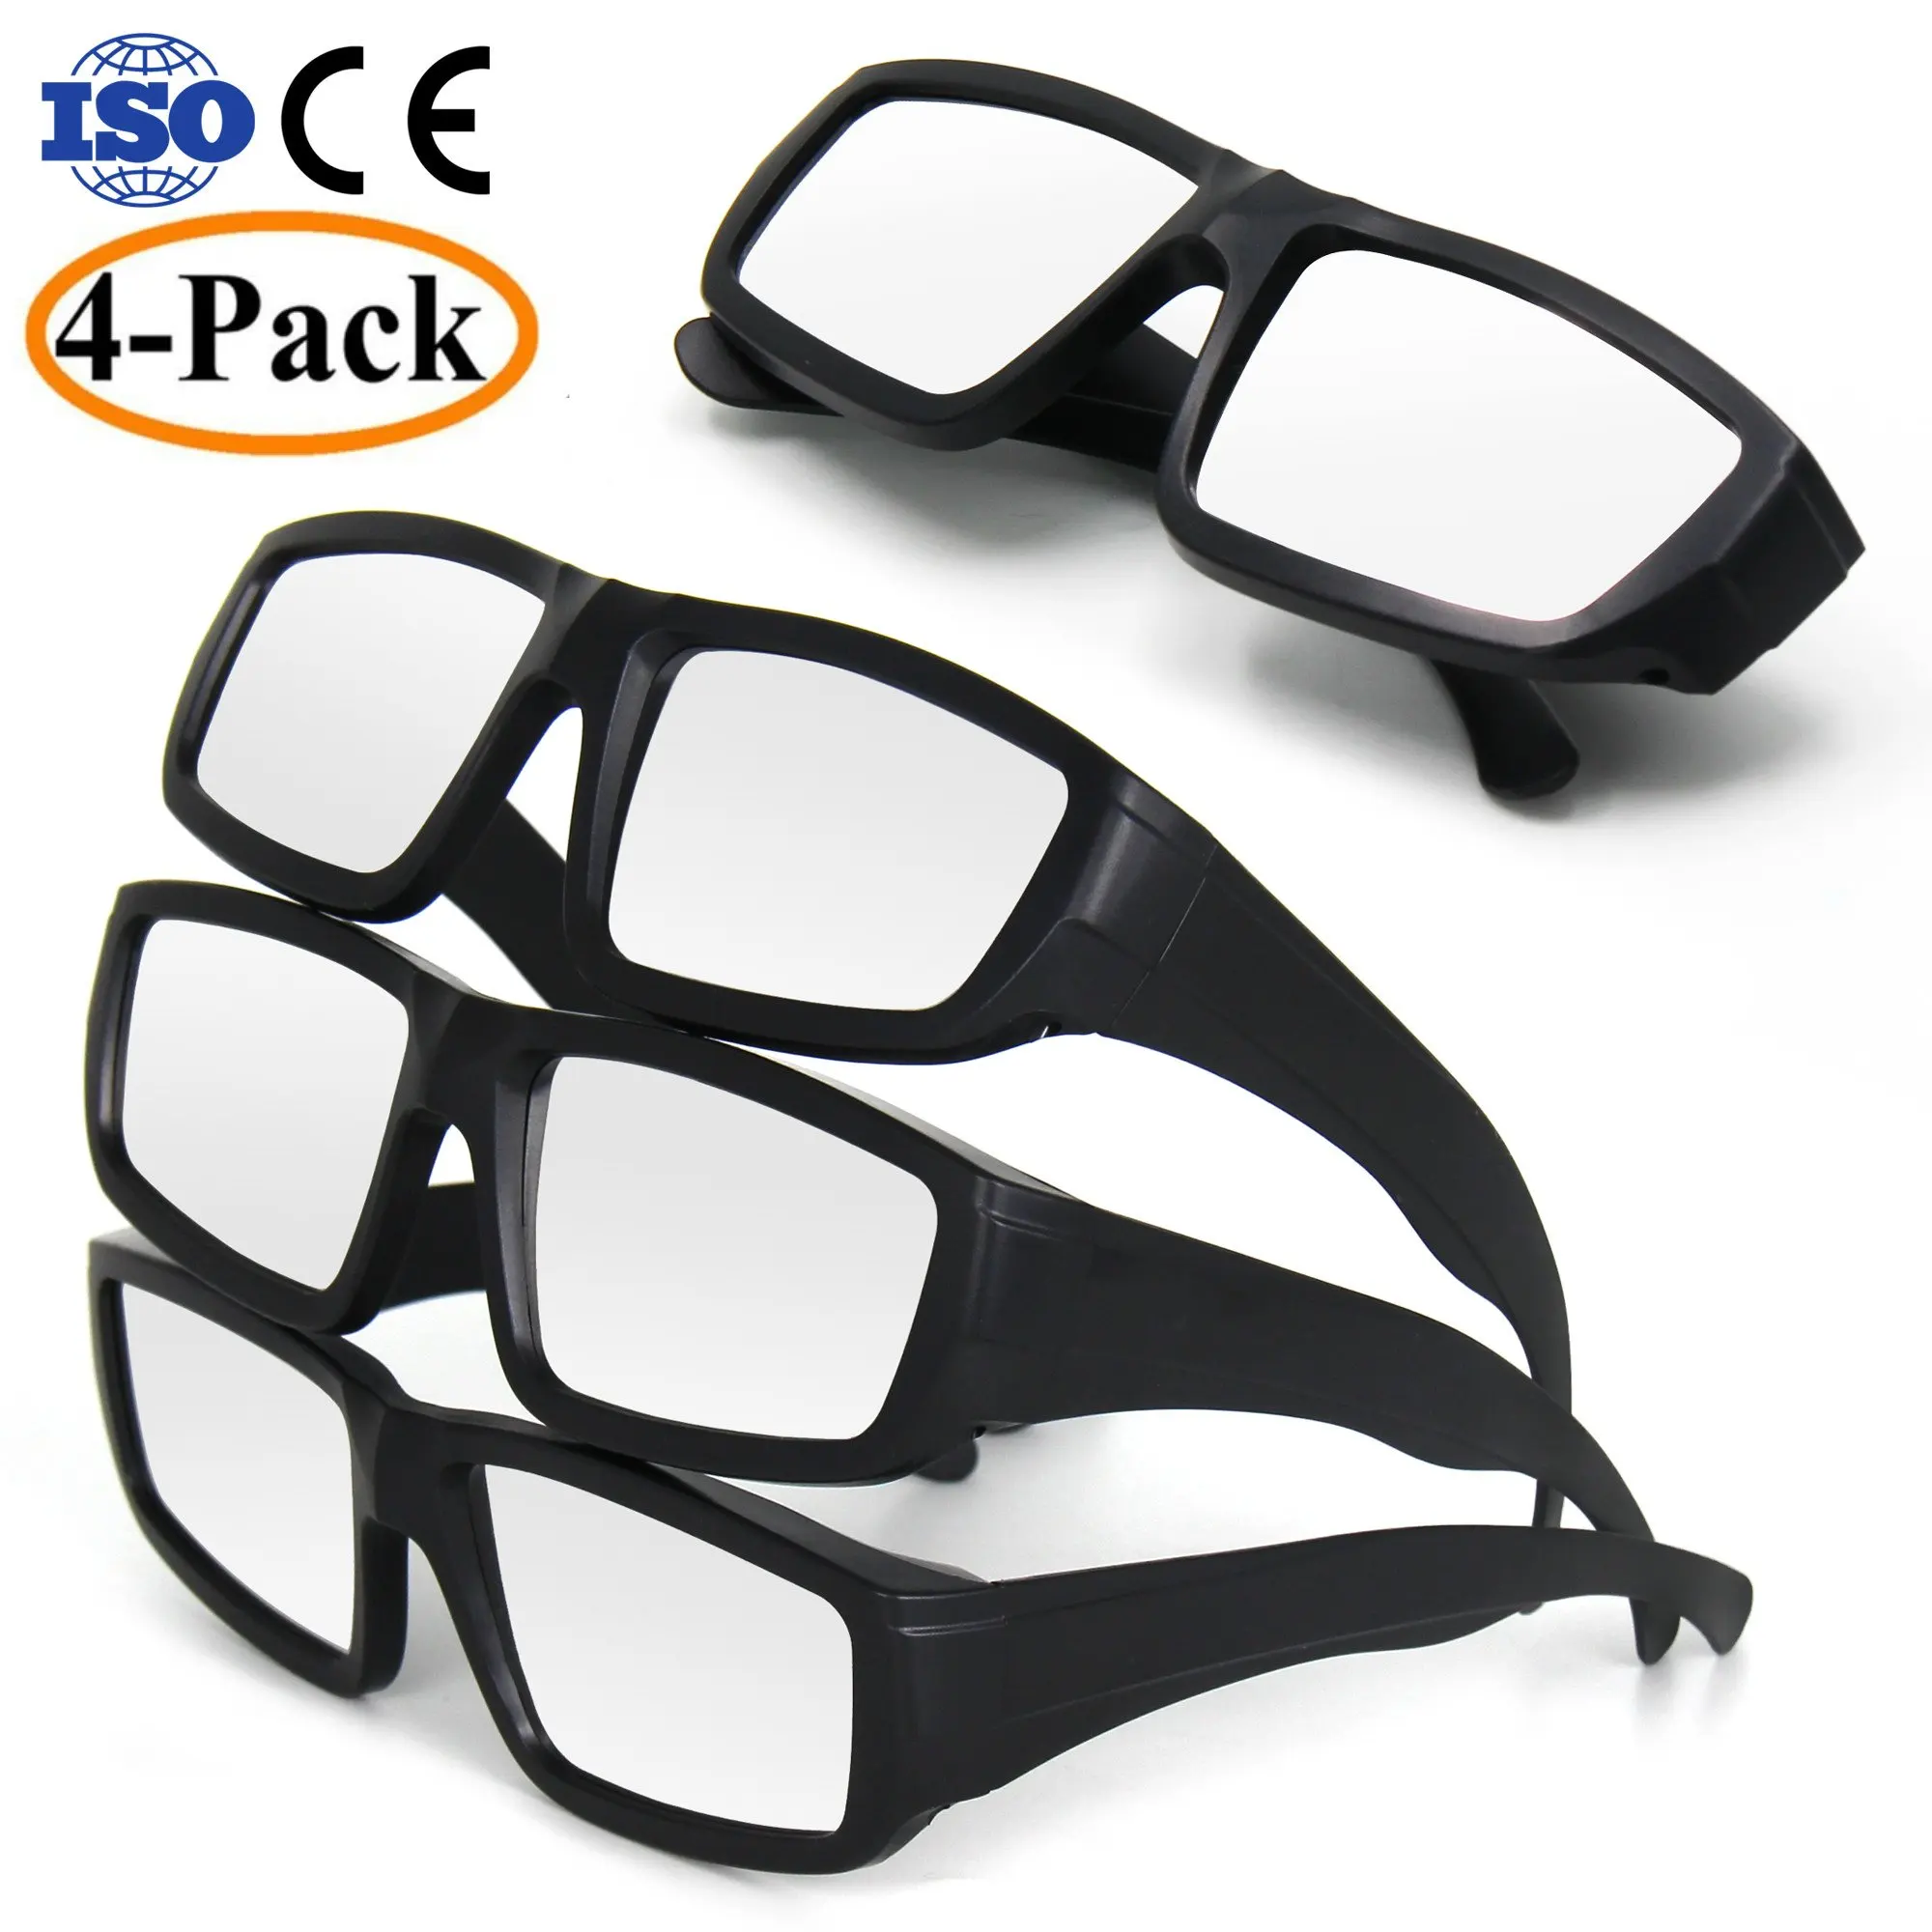 Buy NEWBEA Solar Eclipse Glasses CE and ISO Certified Safe Shades for